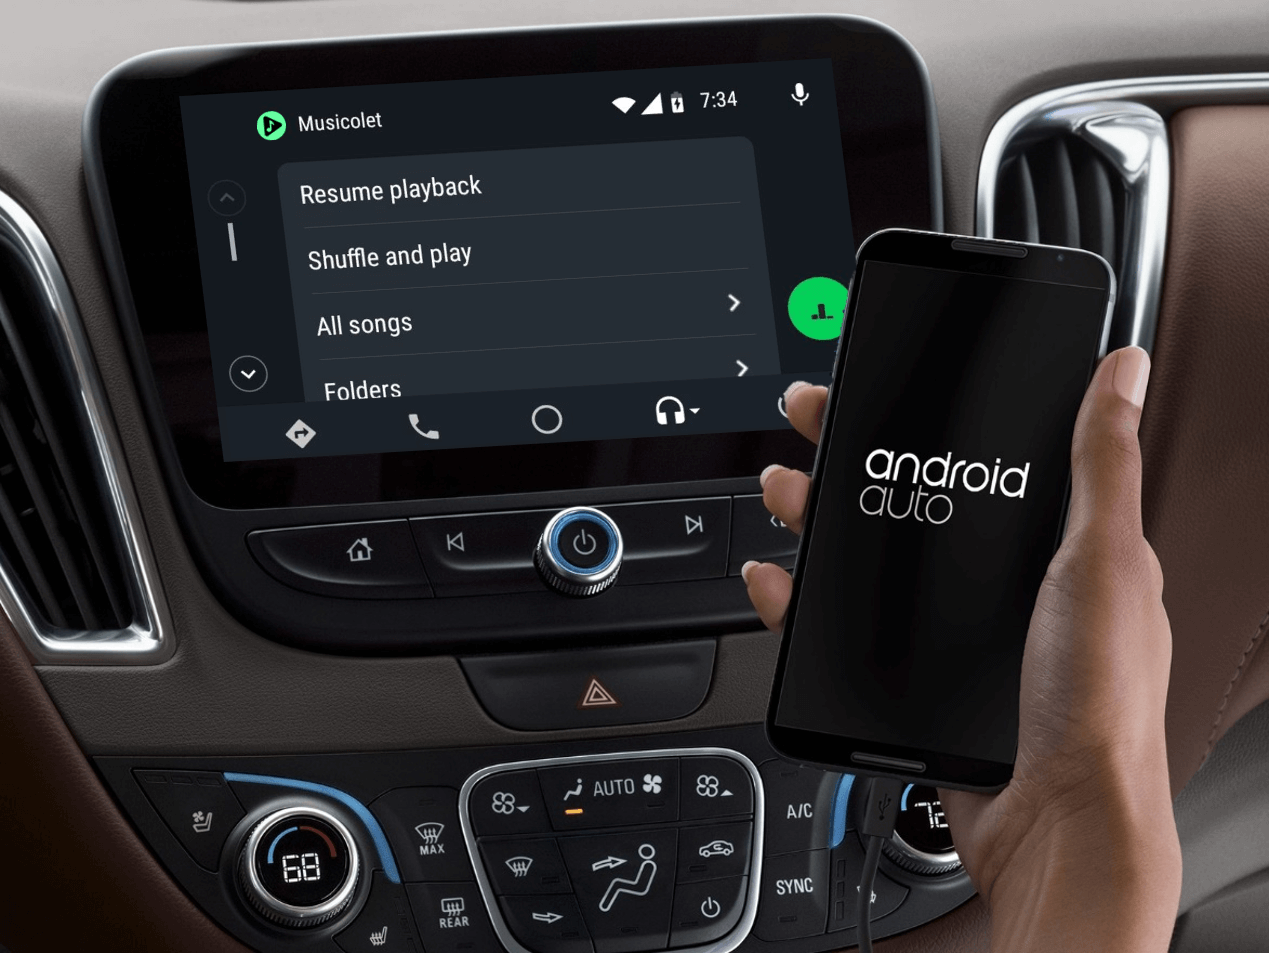 You can access whole Musicolet library from Android Auto.